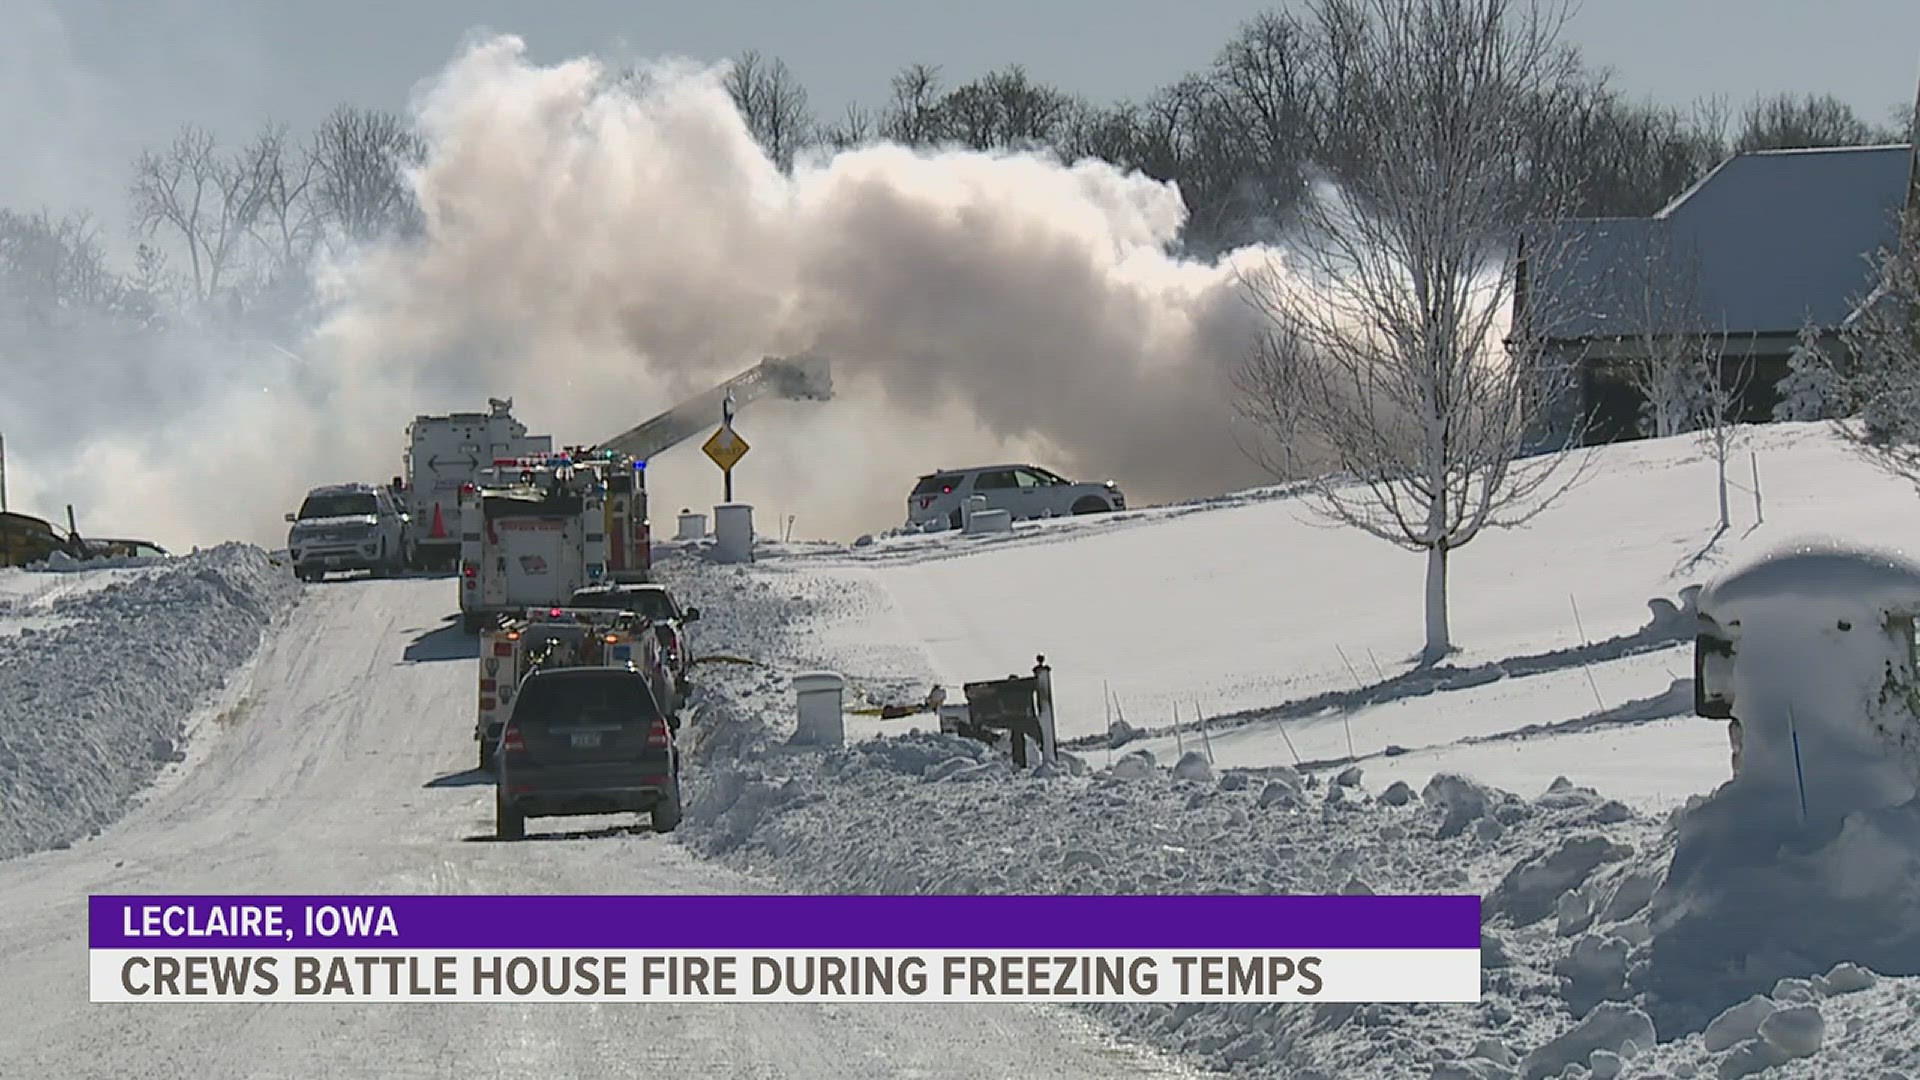 Fire crews in LeClaire battled a house fire during freezing temperatures Tuesday. There is no word on whether any one was injured.